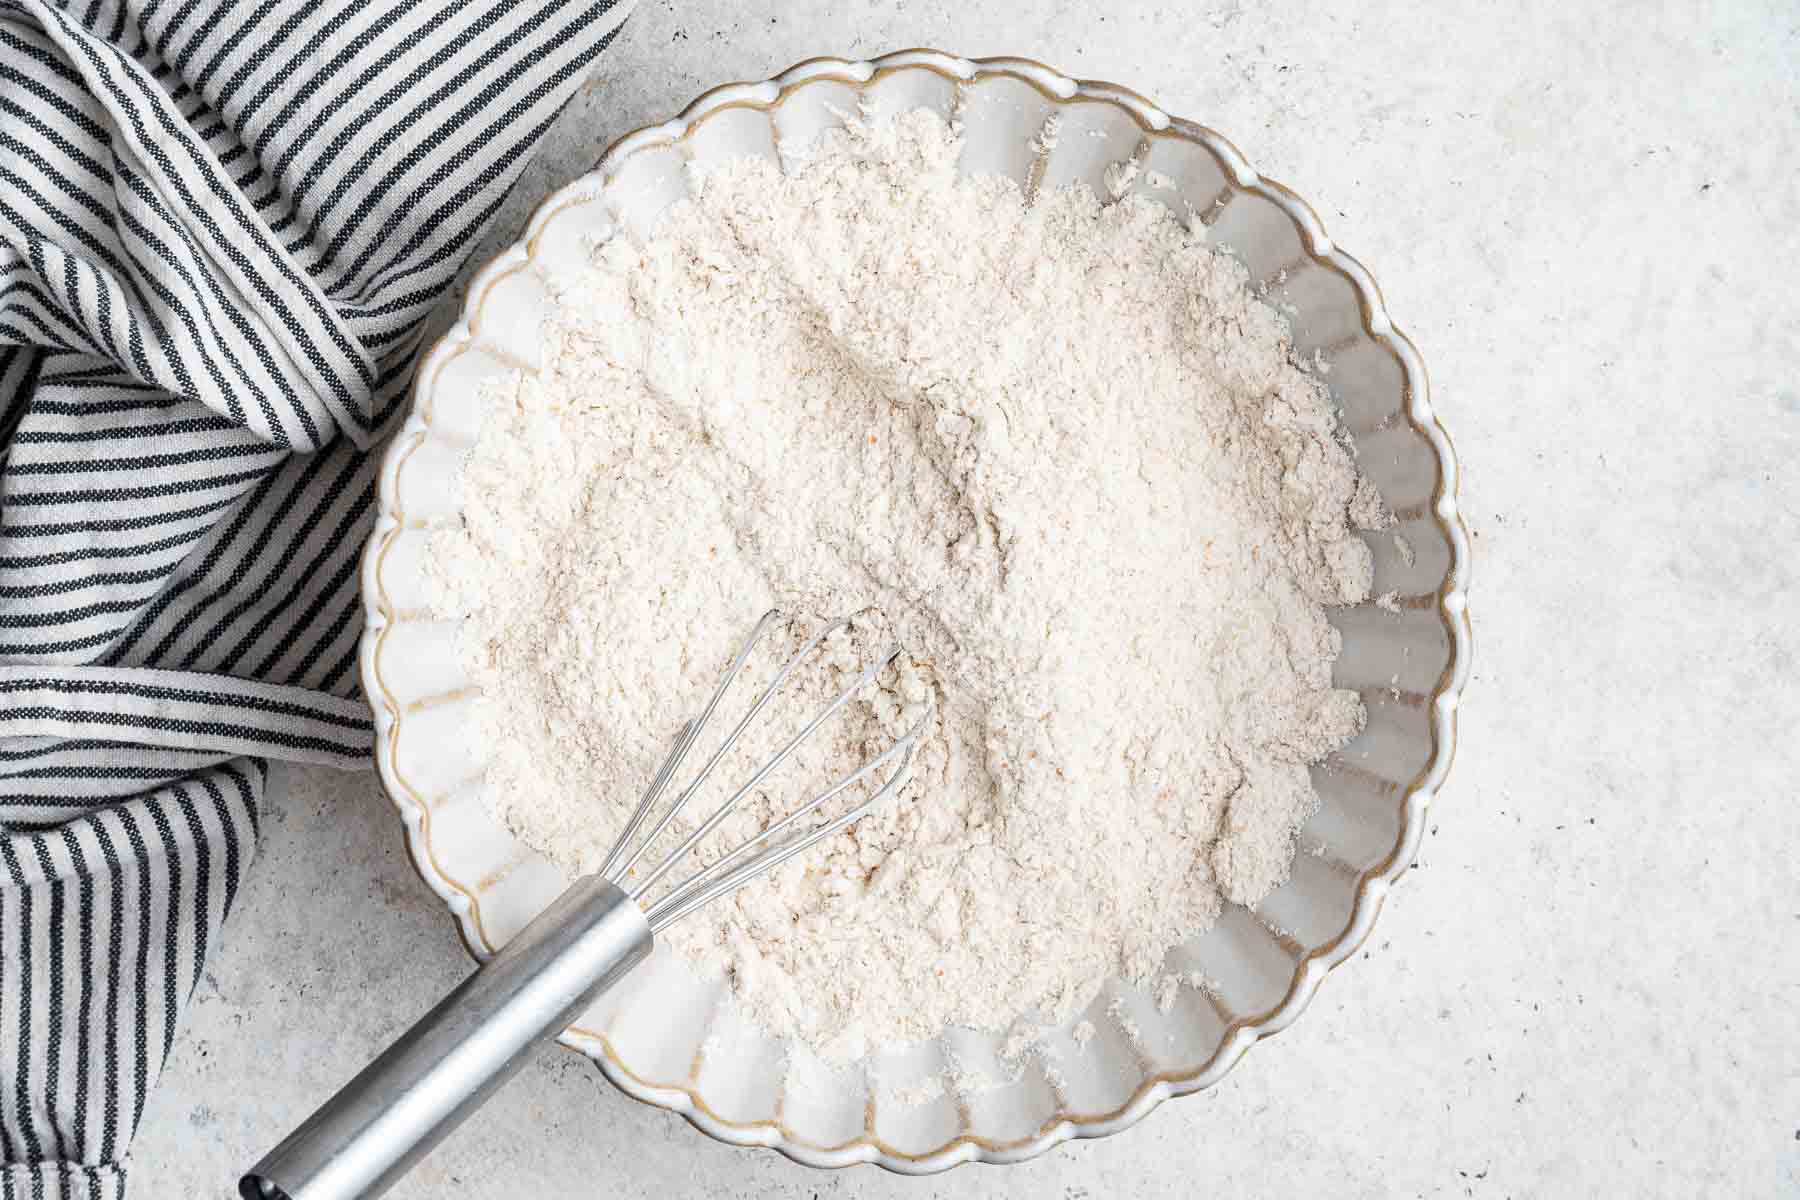 Flour, baking powder, and salt whisked in a small flower bowl.